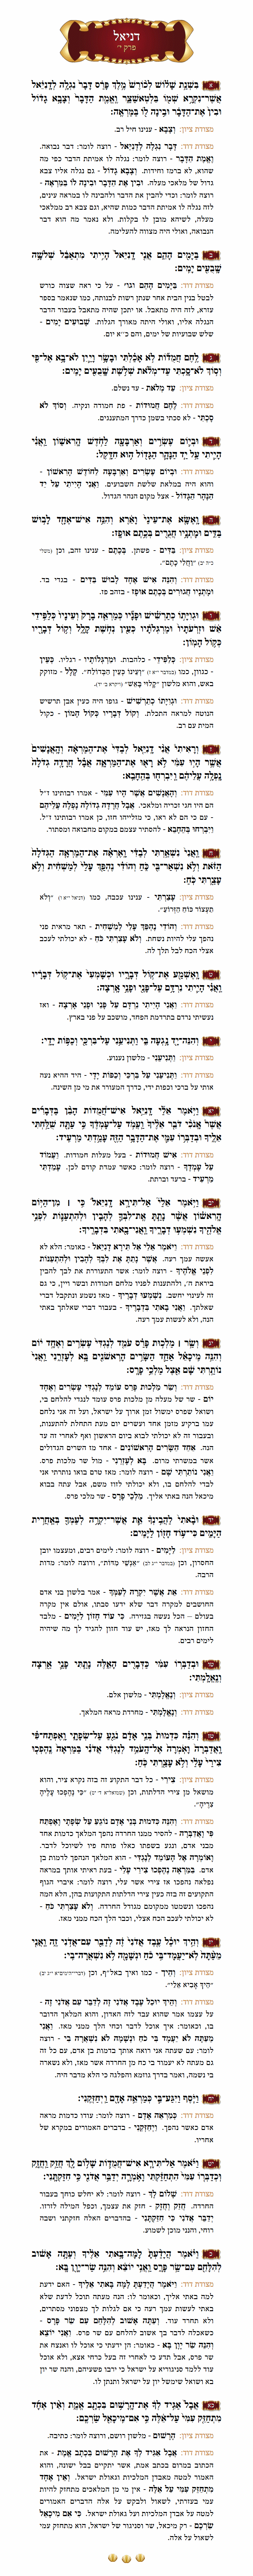 Sefer Daniel Chapter 10 with commentary